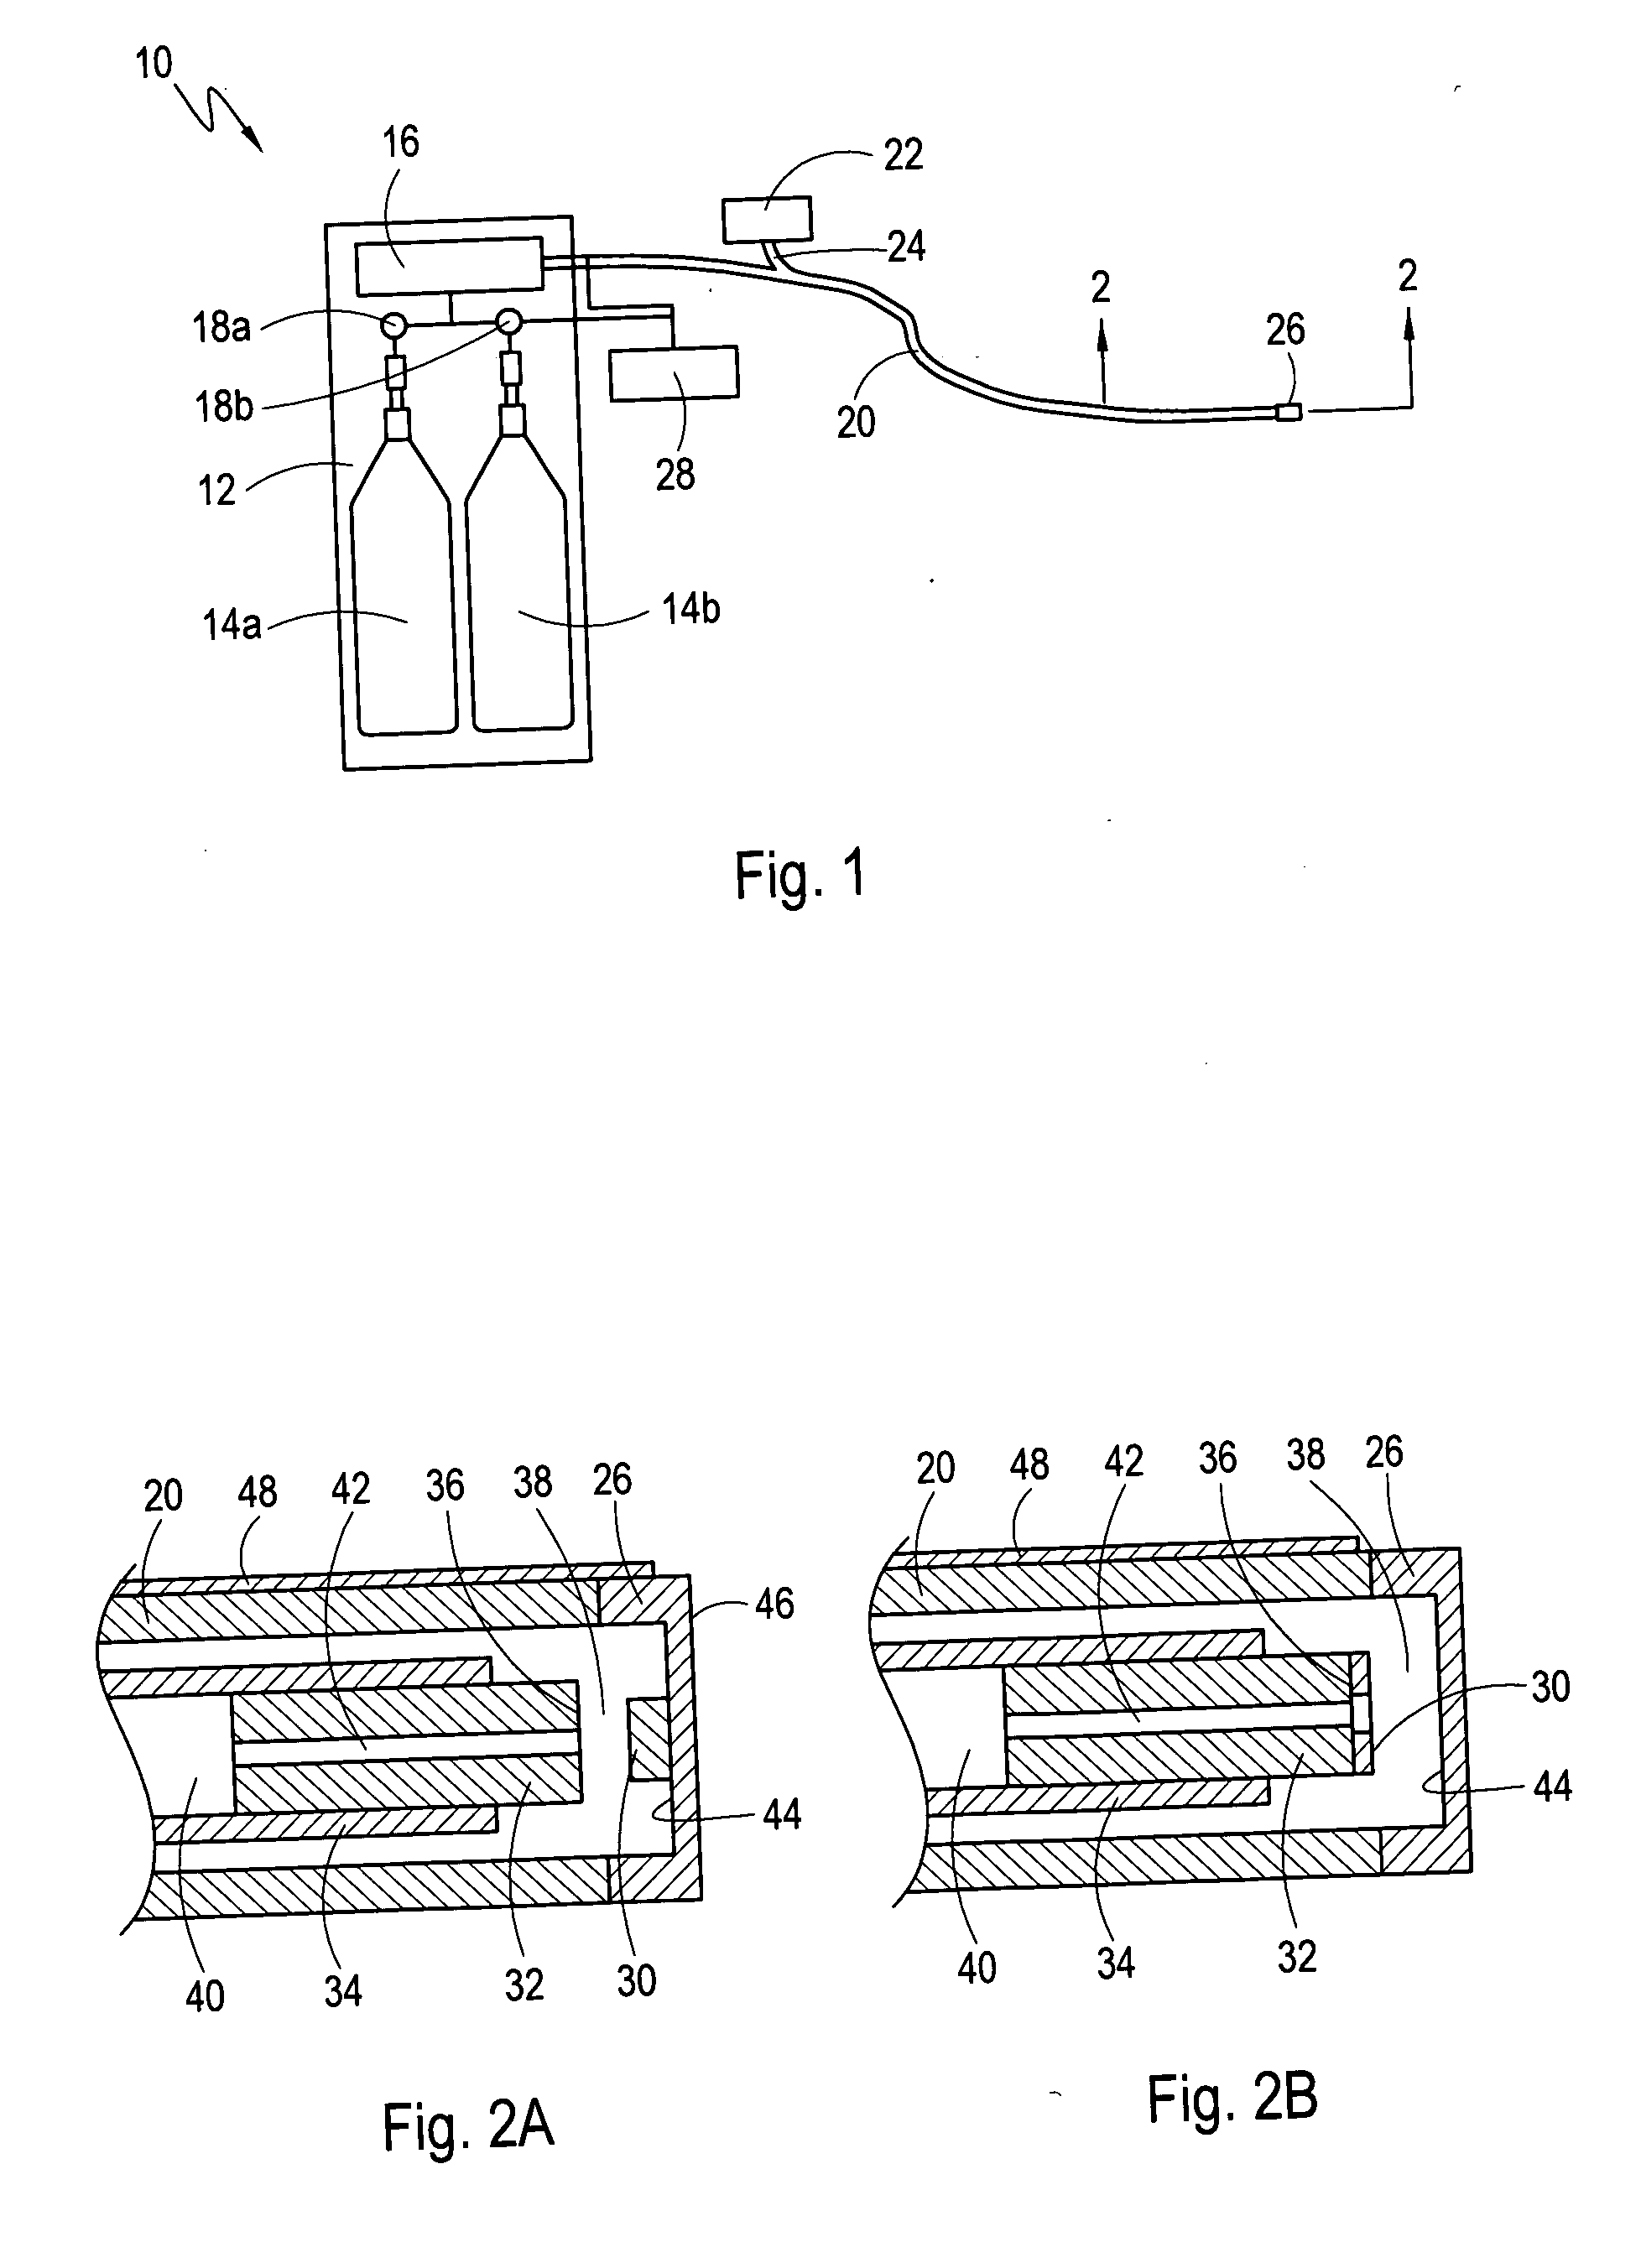 Pressure-temperature control for a cryoablation catheter system